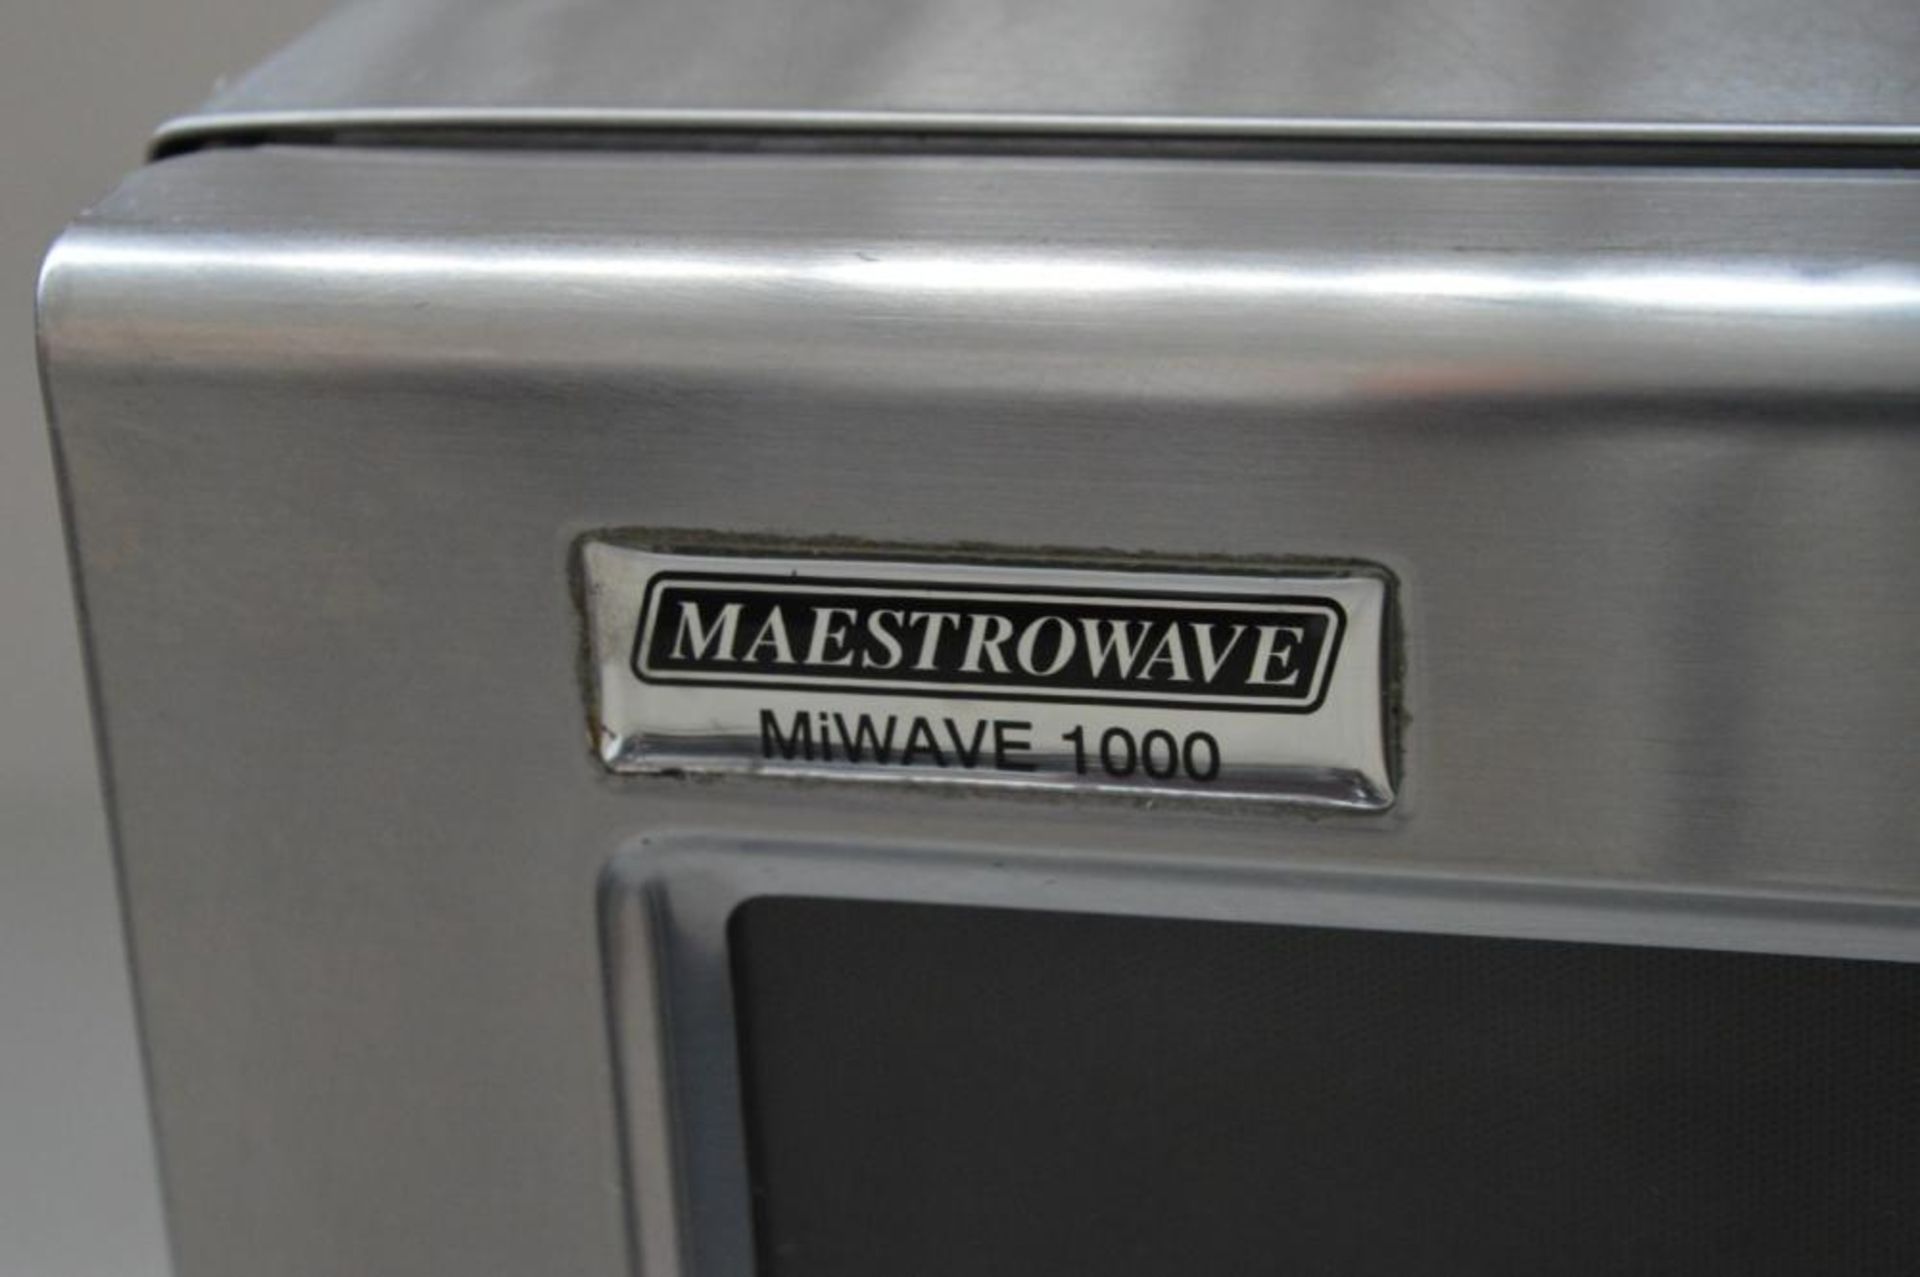 1 x iWave MiWAVE1000 Automated Foodservice Solution - Stainless Steel 1000w Catering Microwave - Image 7 of 14